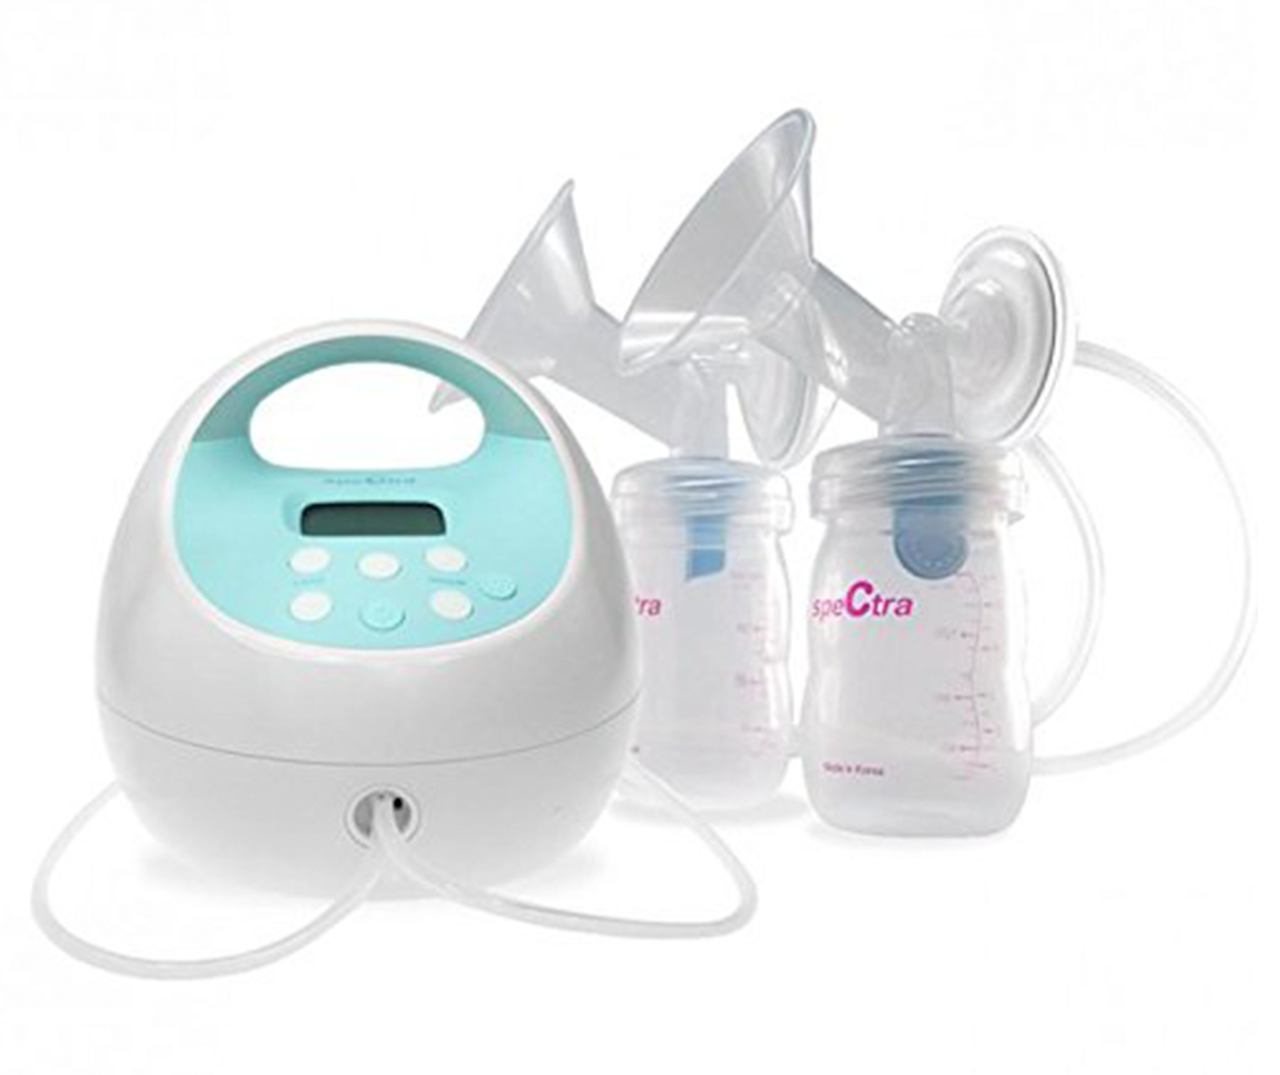 Spectra S1 Plus Breast Pump with Insurance from EHCS